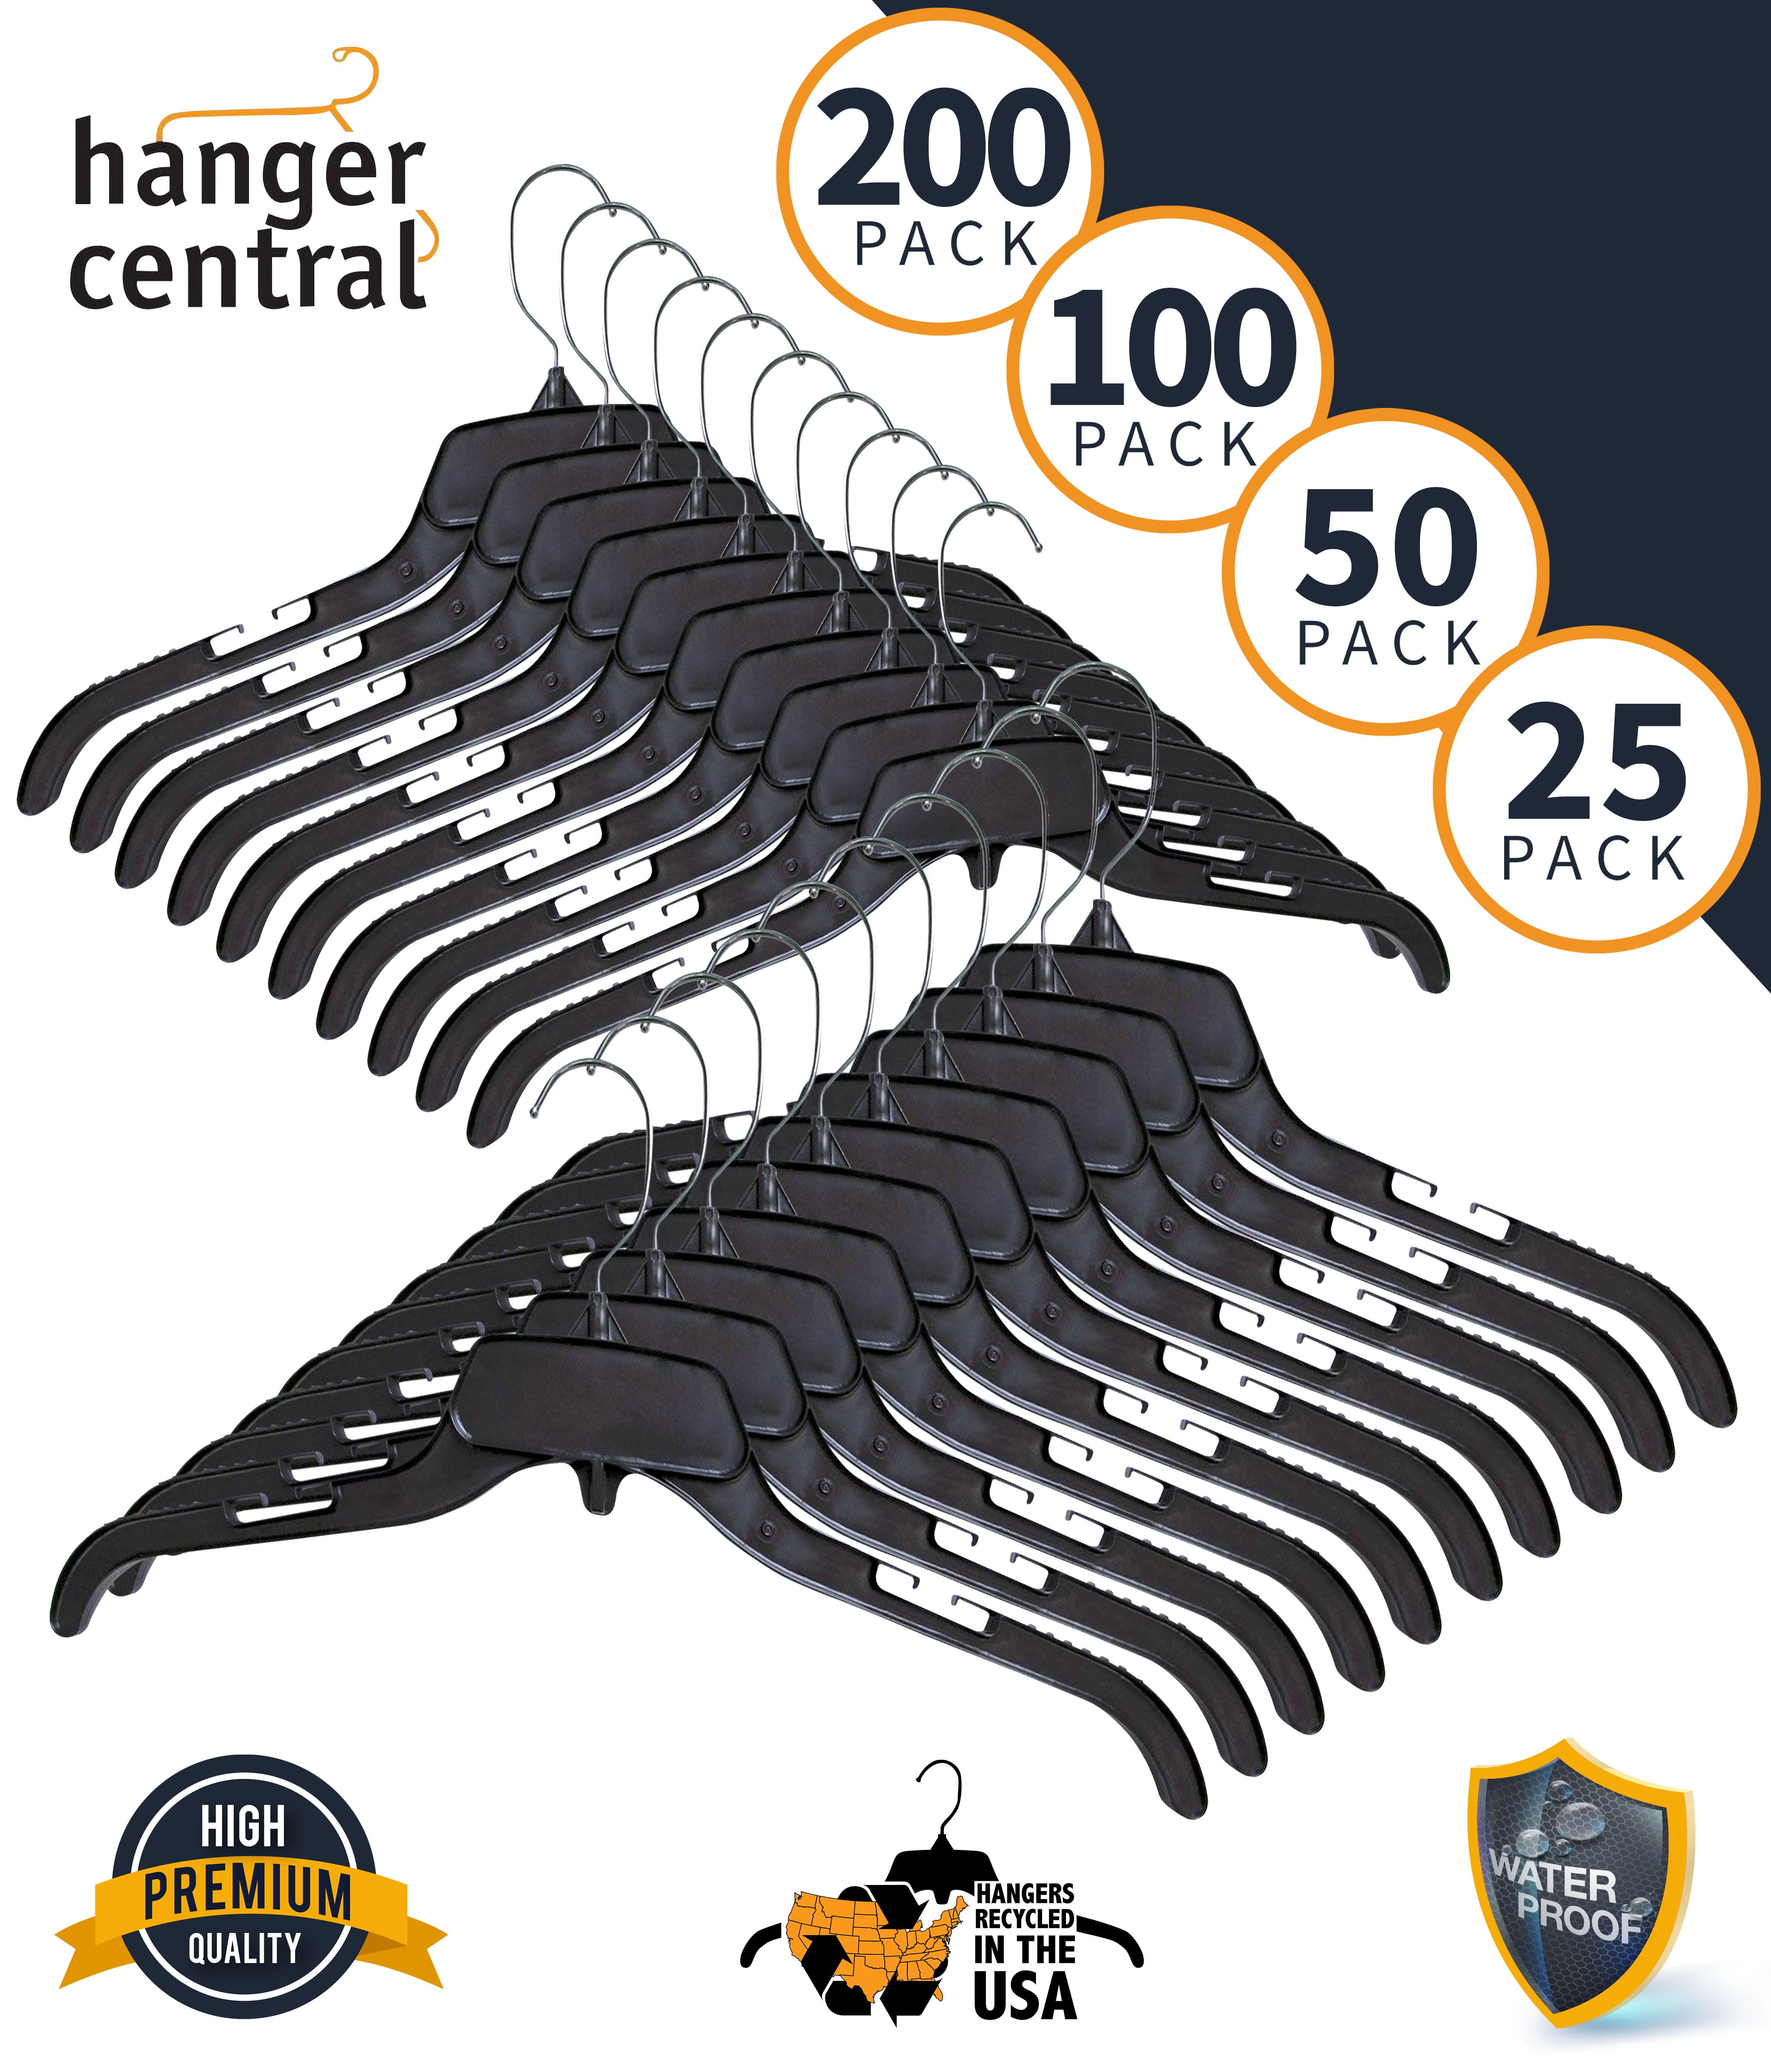 Plastic Hangers HD Heavy Duty, 16 PCS. Elegant Black Color, Made in USA, 3/8 Thickness, Durable, Tubular, Lightweight, for Clothes, Coat, Pants, Shirt